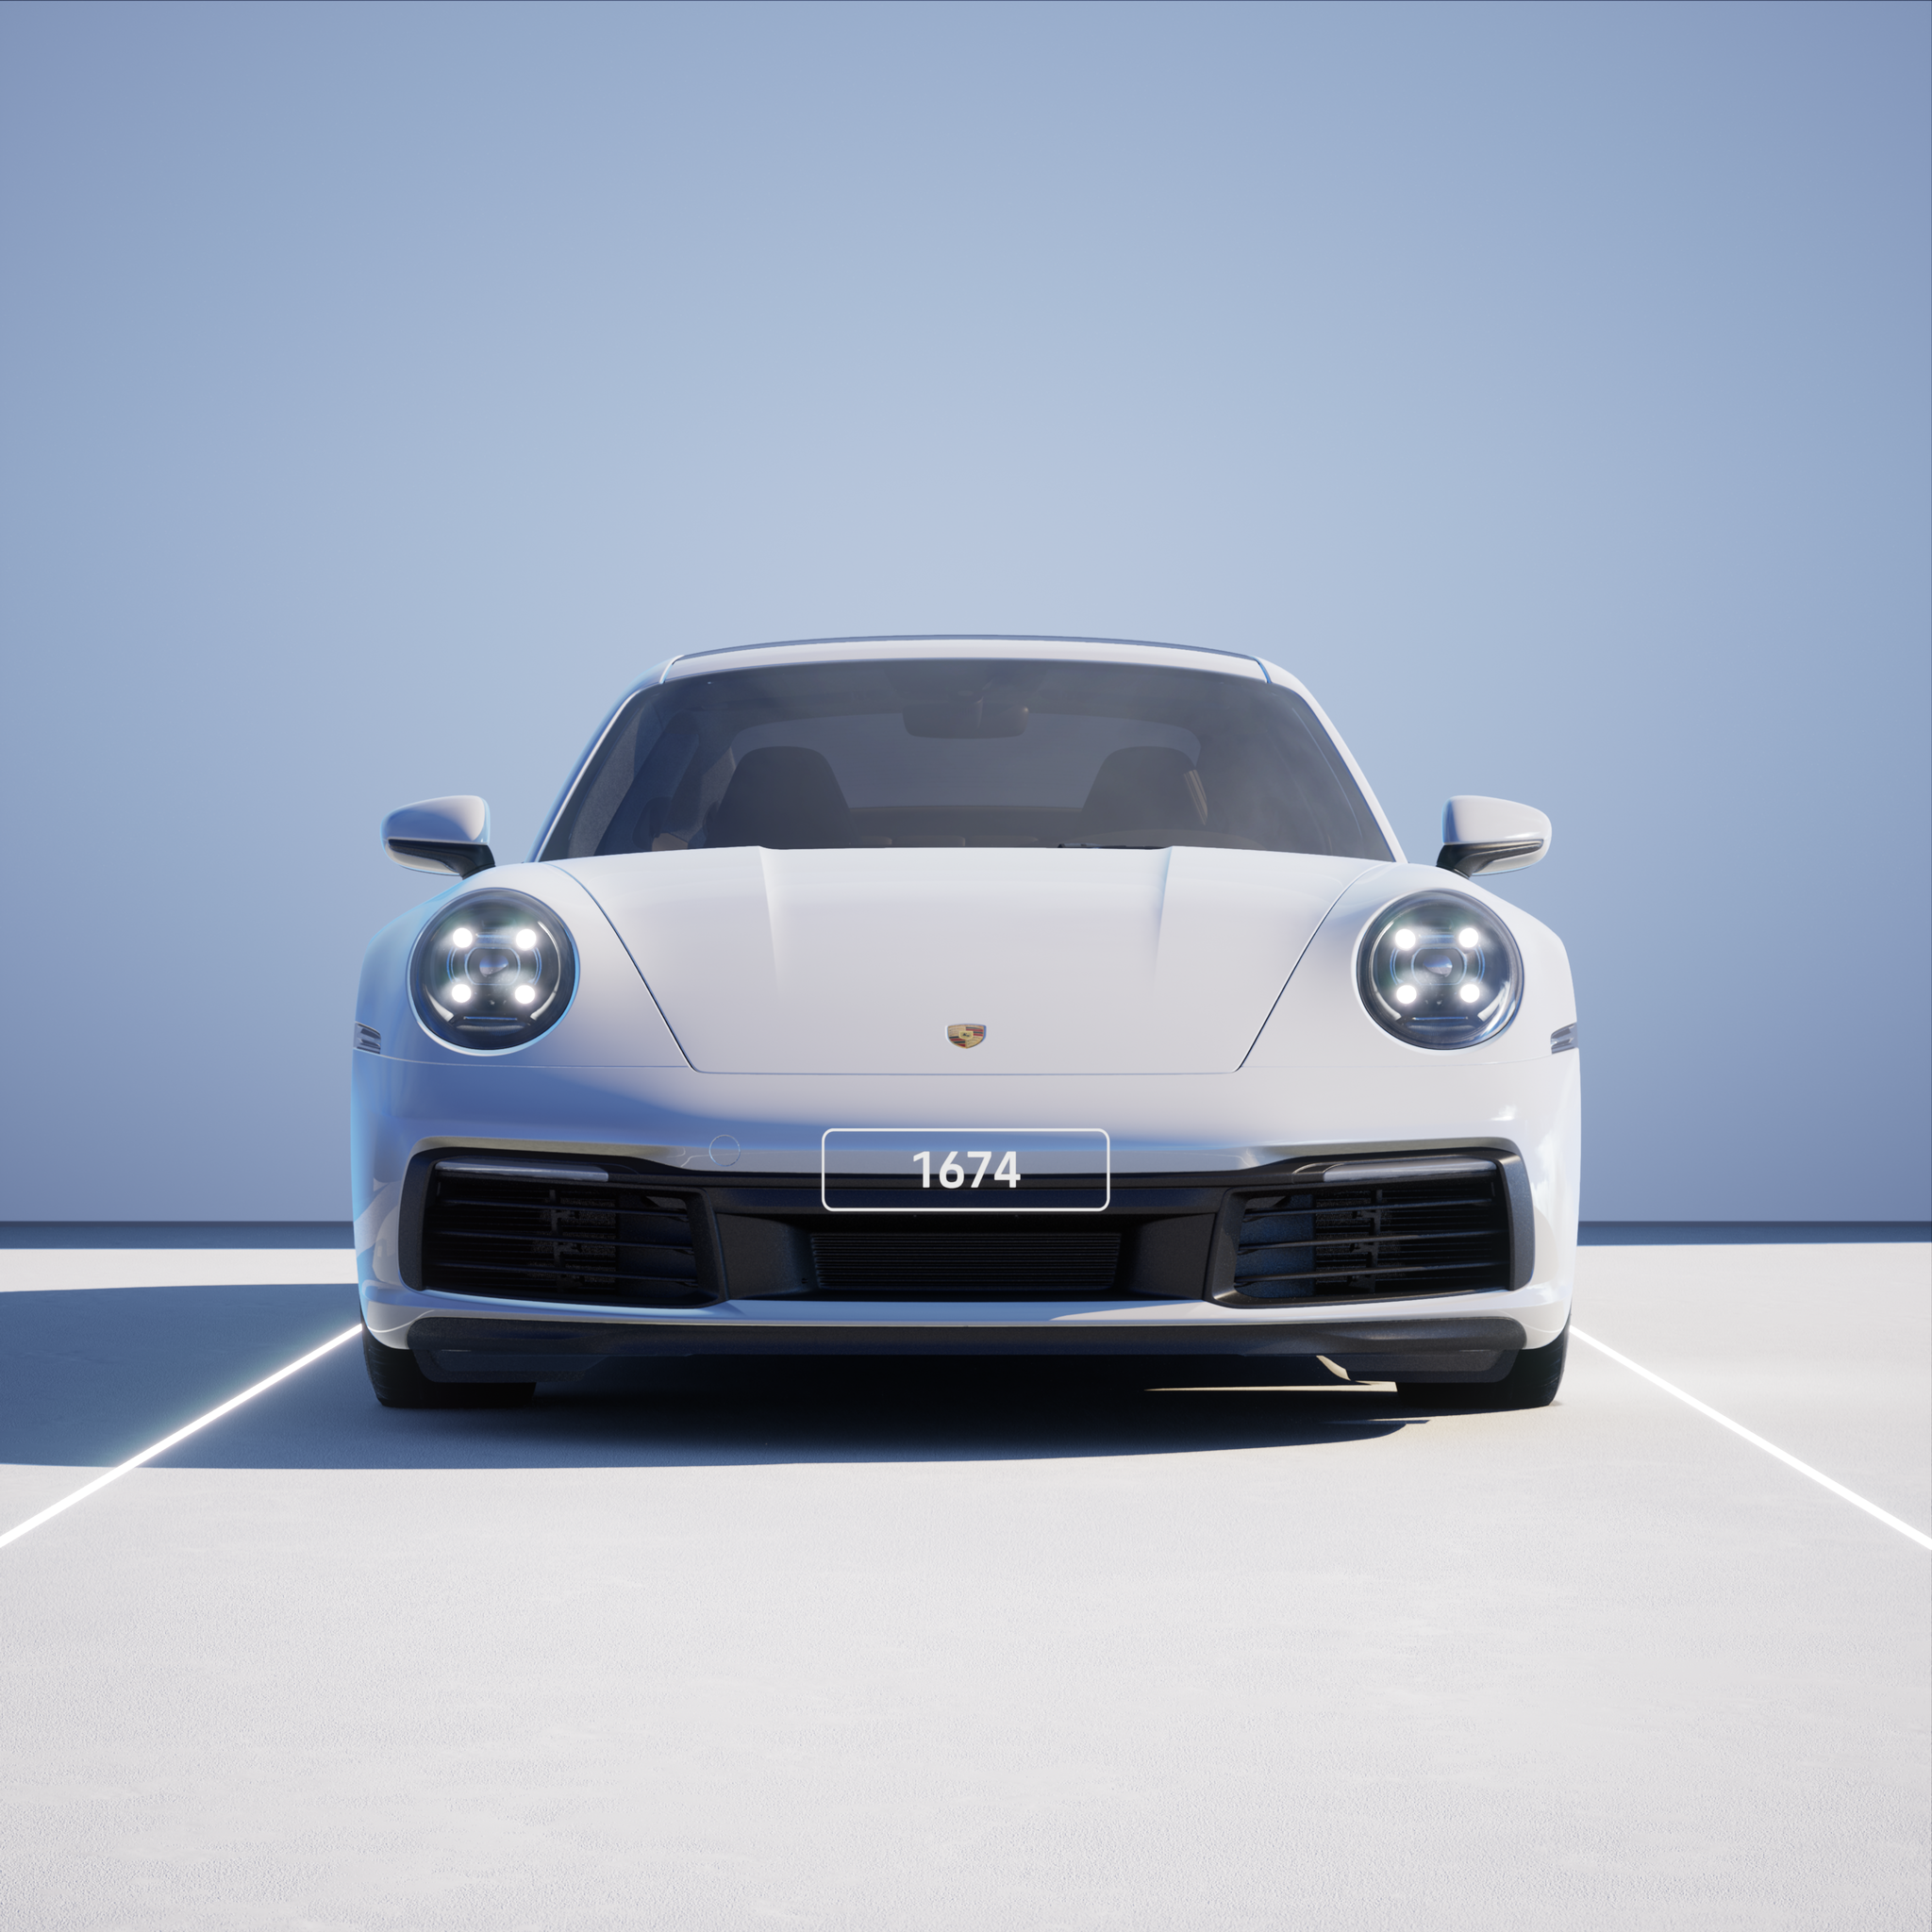 The PORSCHΞ 911 1674 image in phase